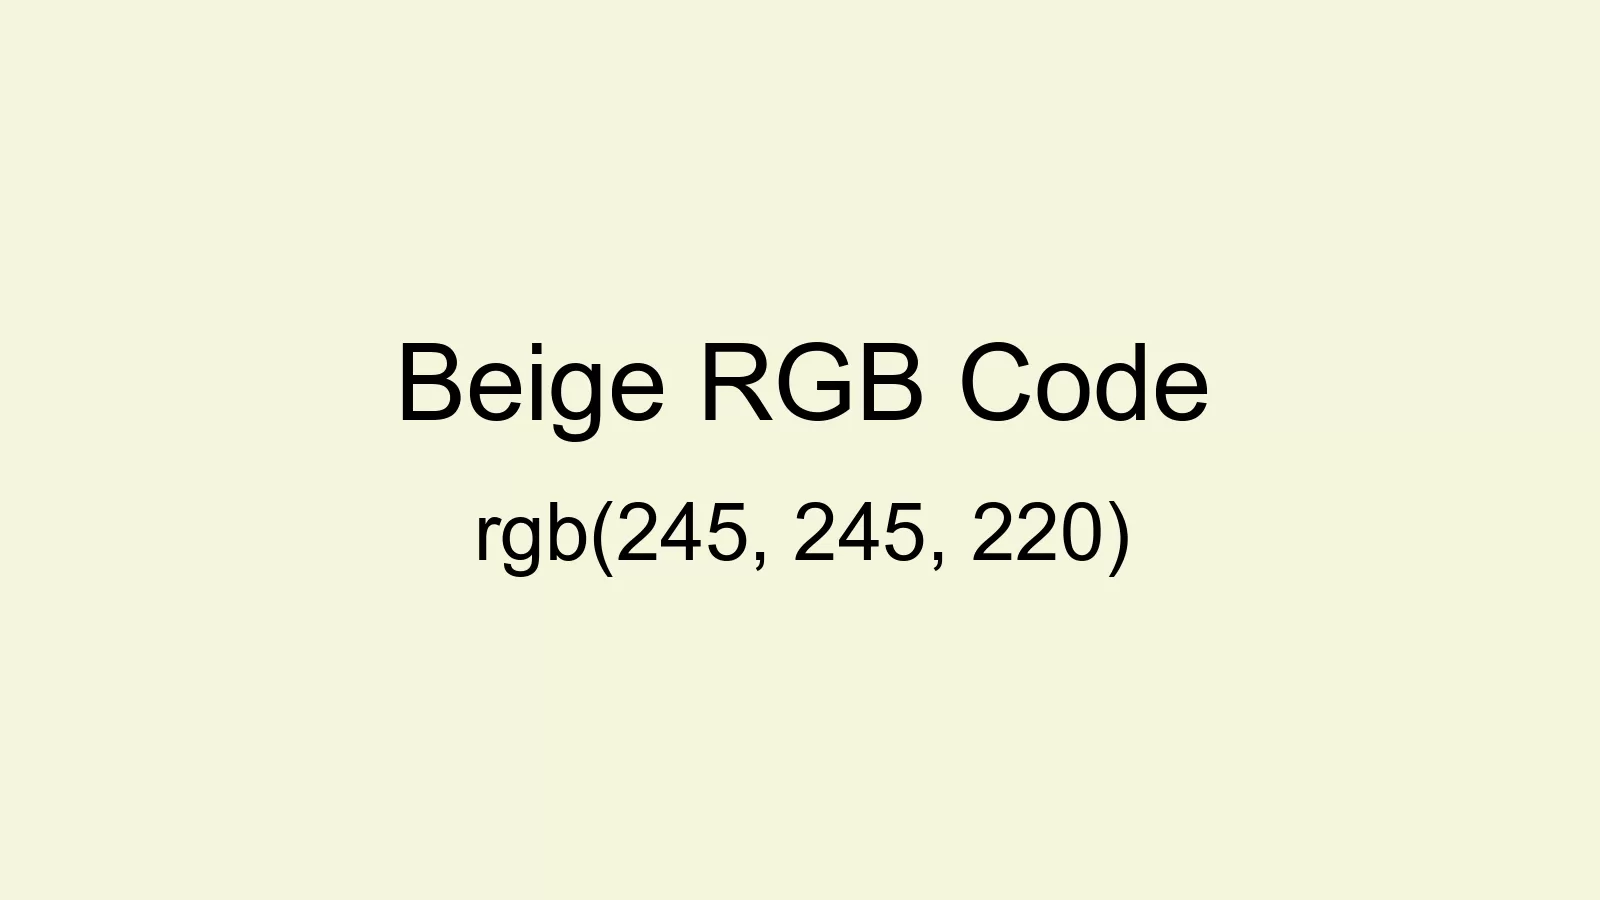 preview image of Beige color and RGB code